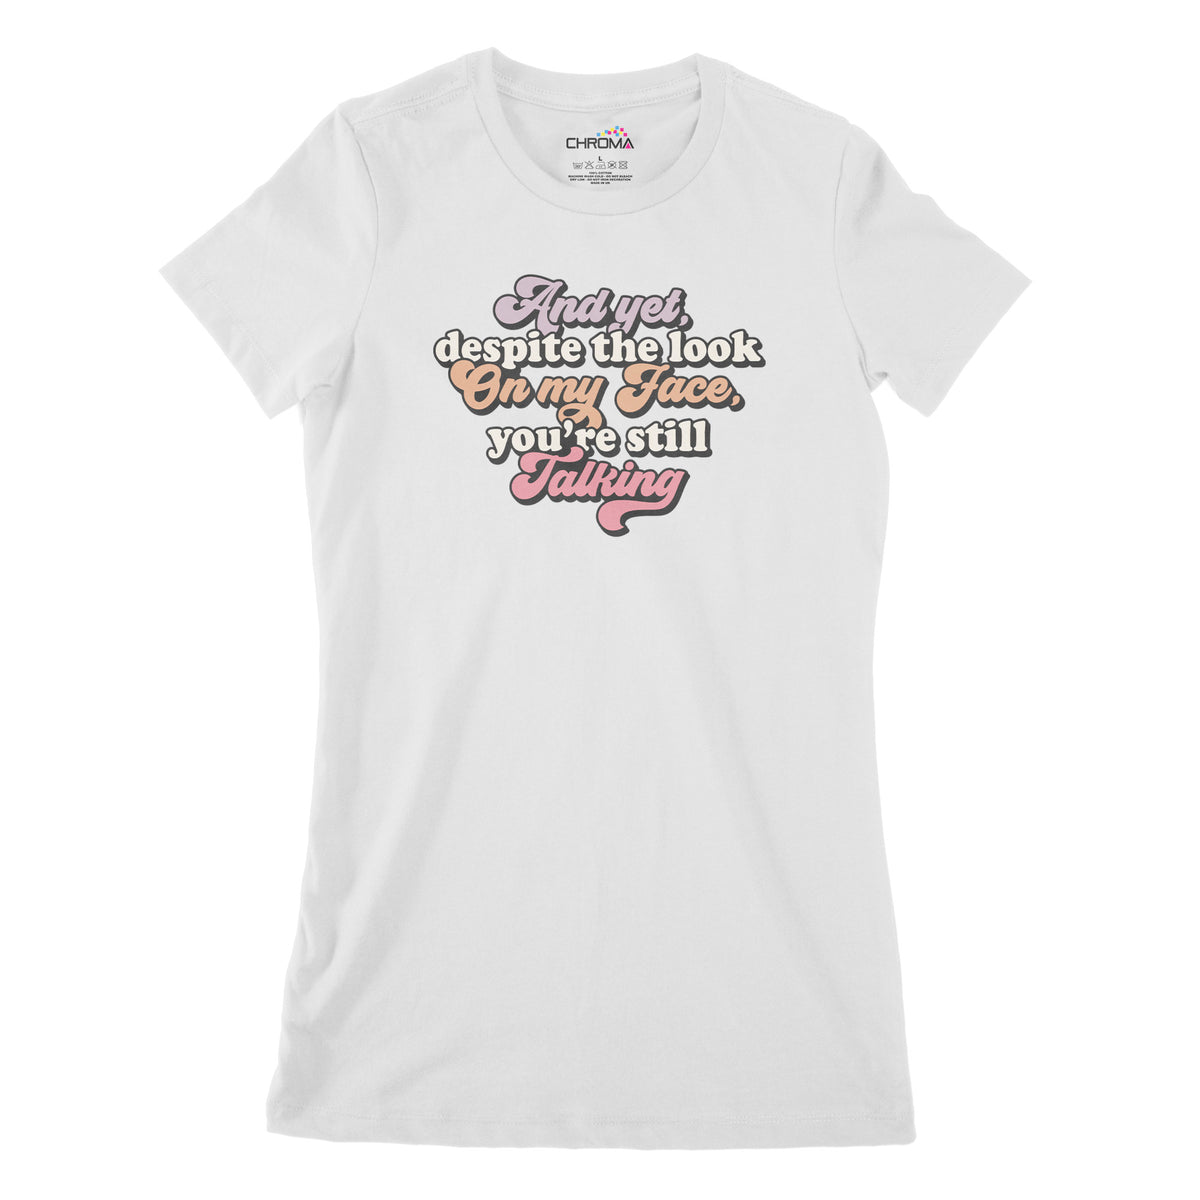 And Yet You're Still Talking | Women's Classic Fitted T-Shirt Chroma Clothing